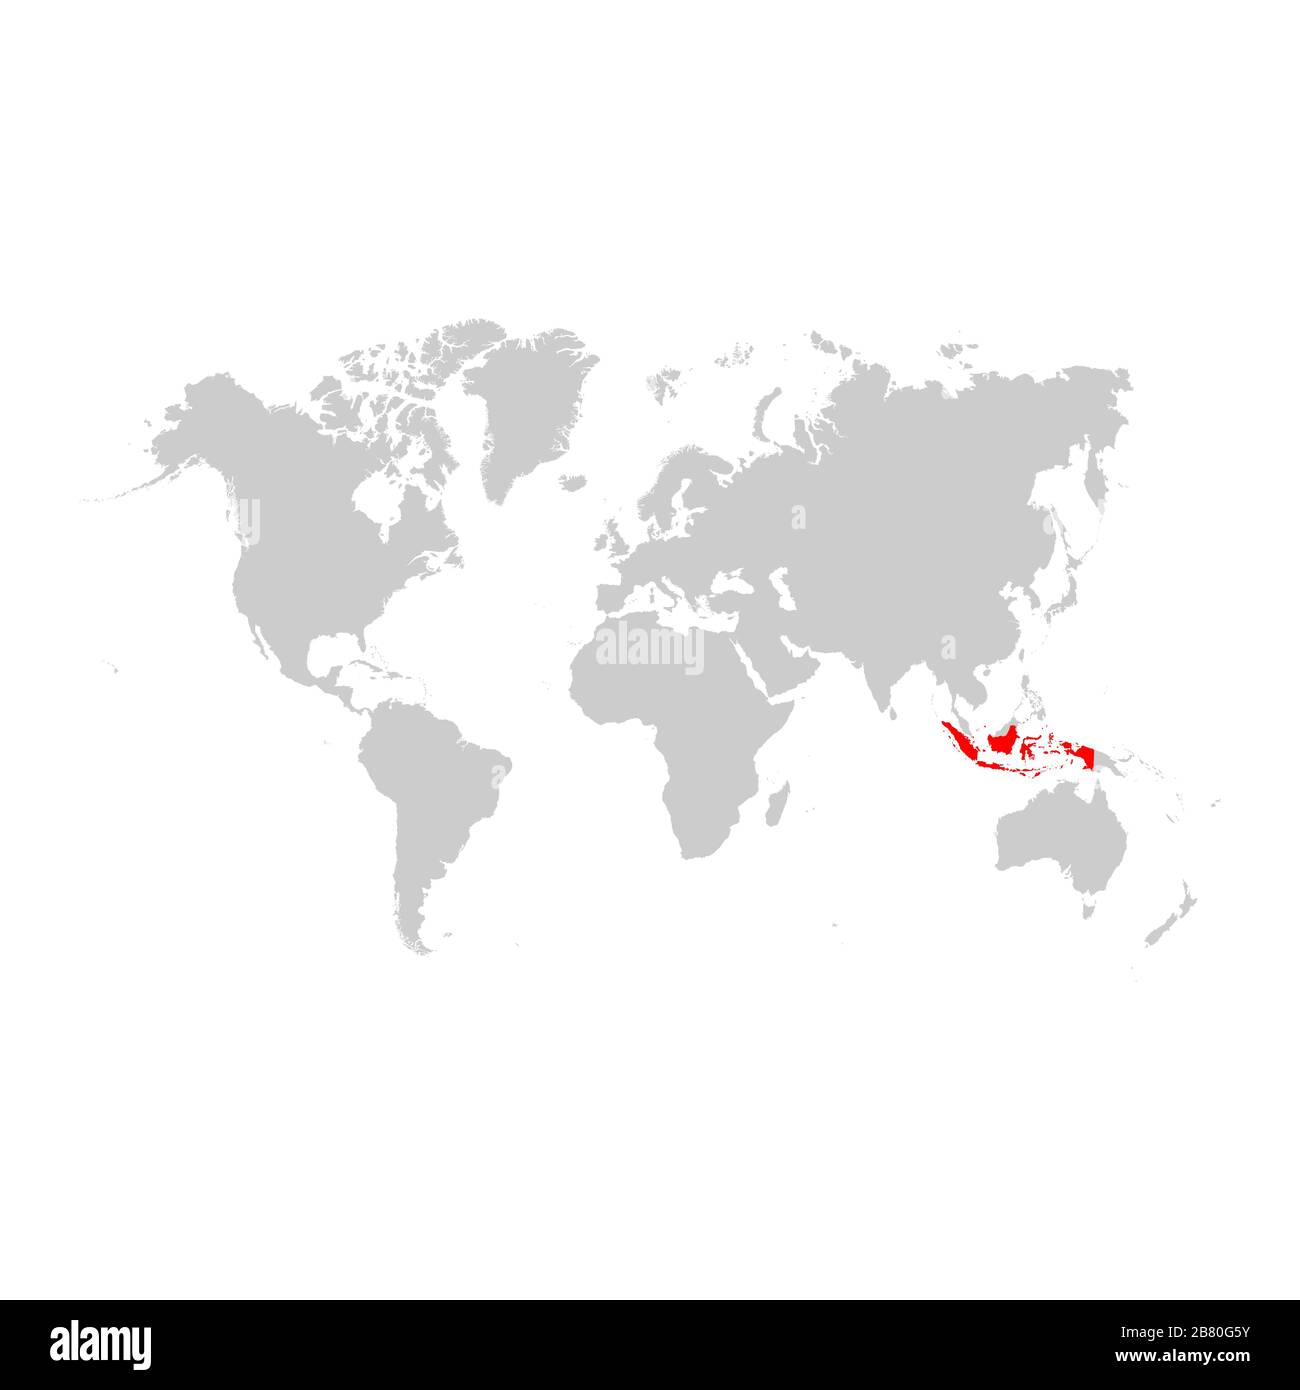 Indonesia on world map Stock Vector